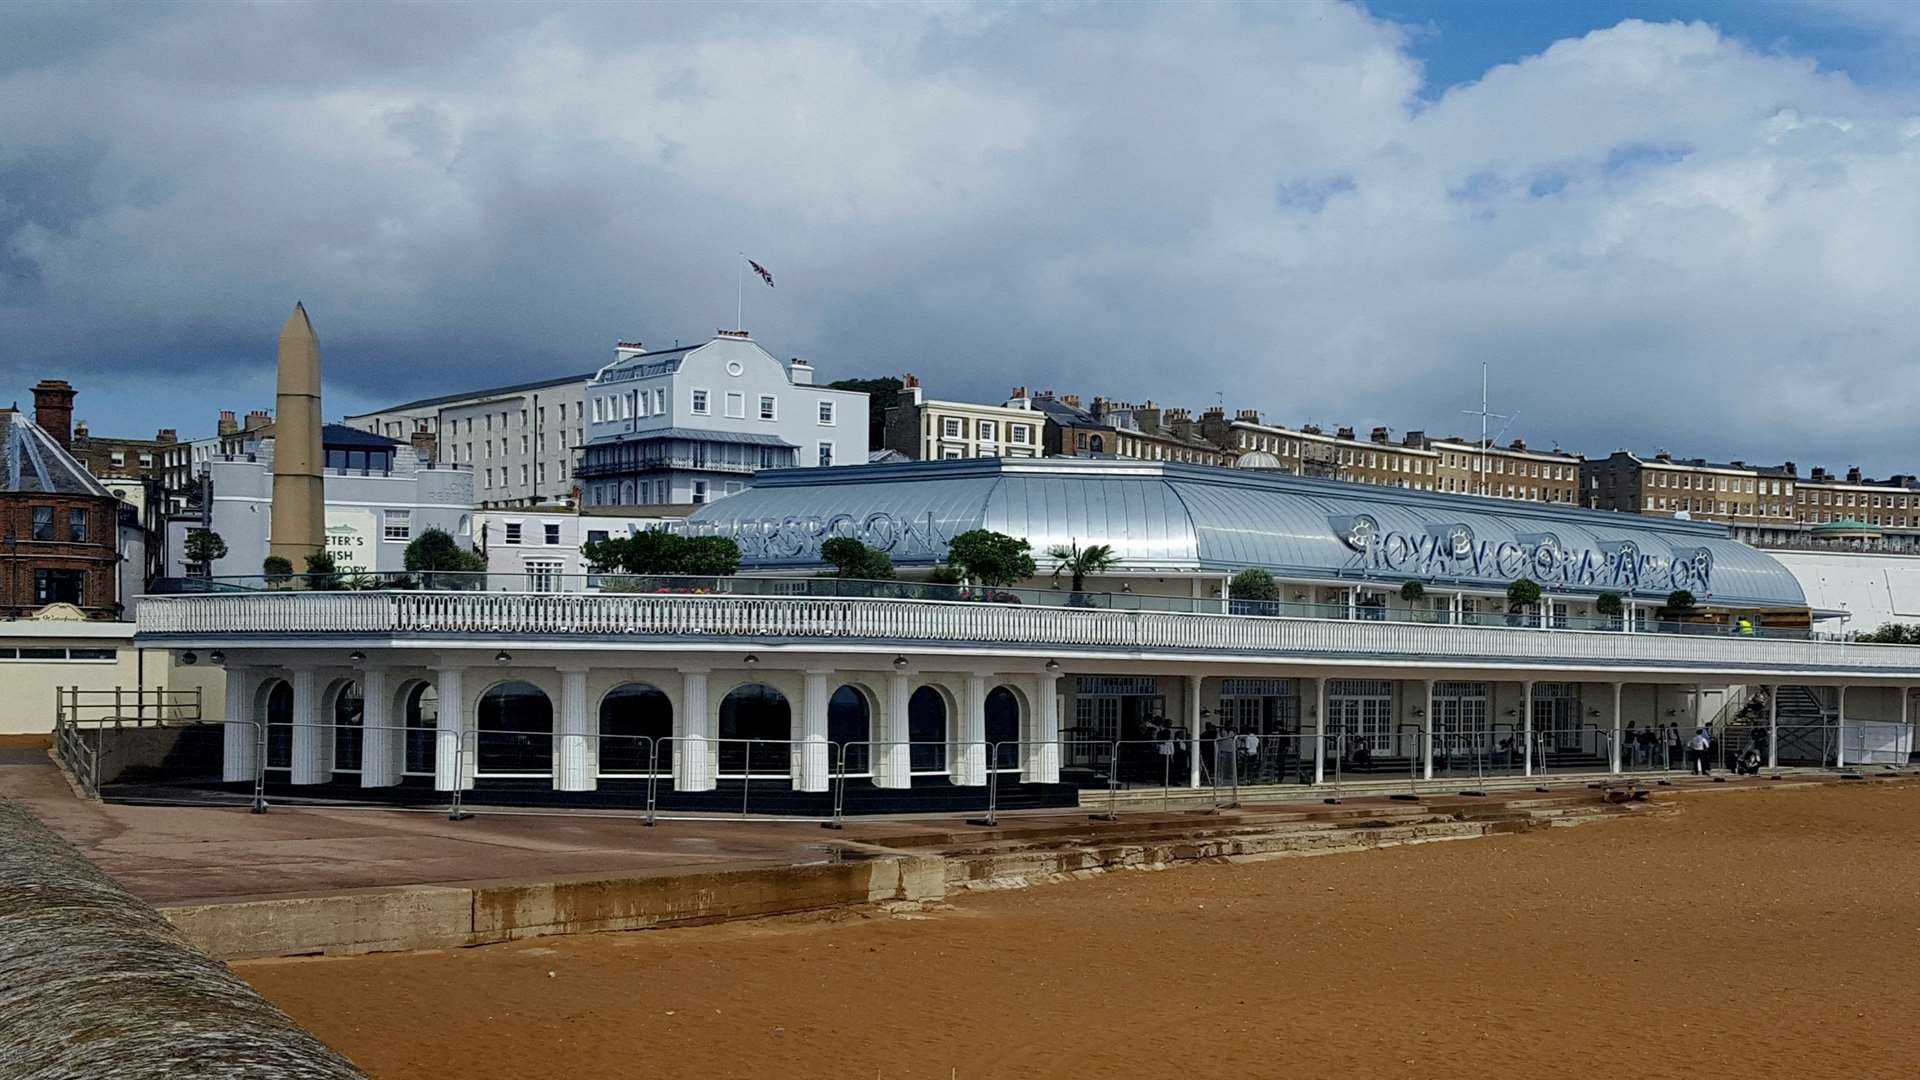 The Sunday Times has slated Ramgate's new Wetherspoons pub at the Royal Victoria Pavilion